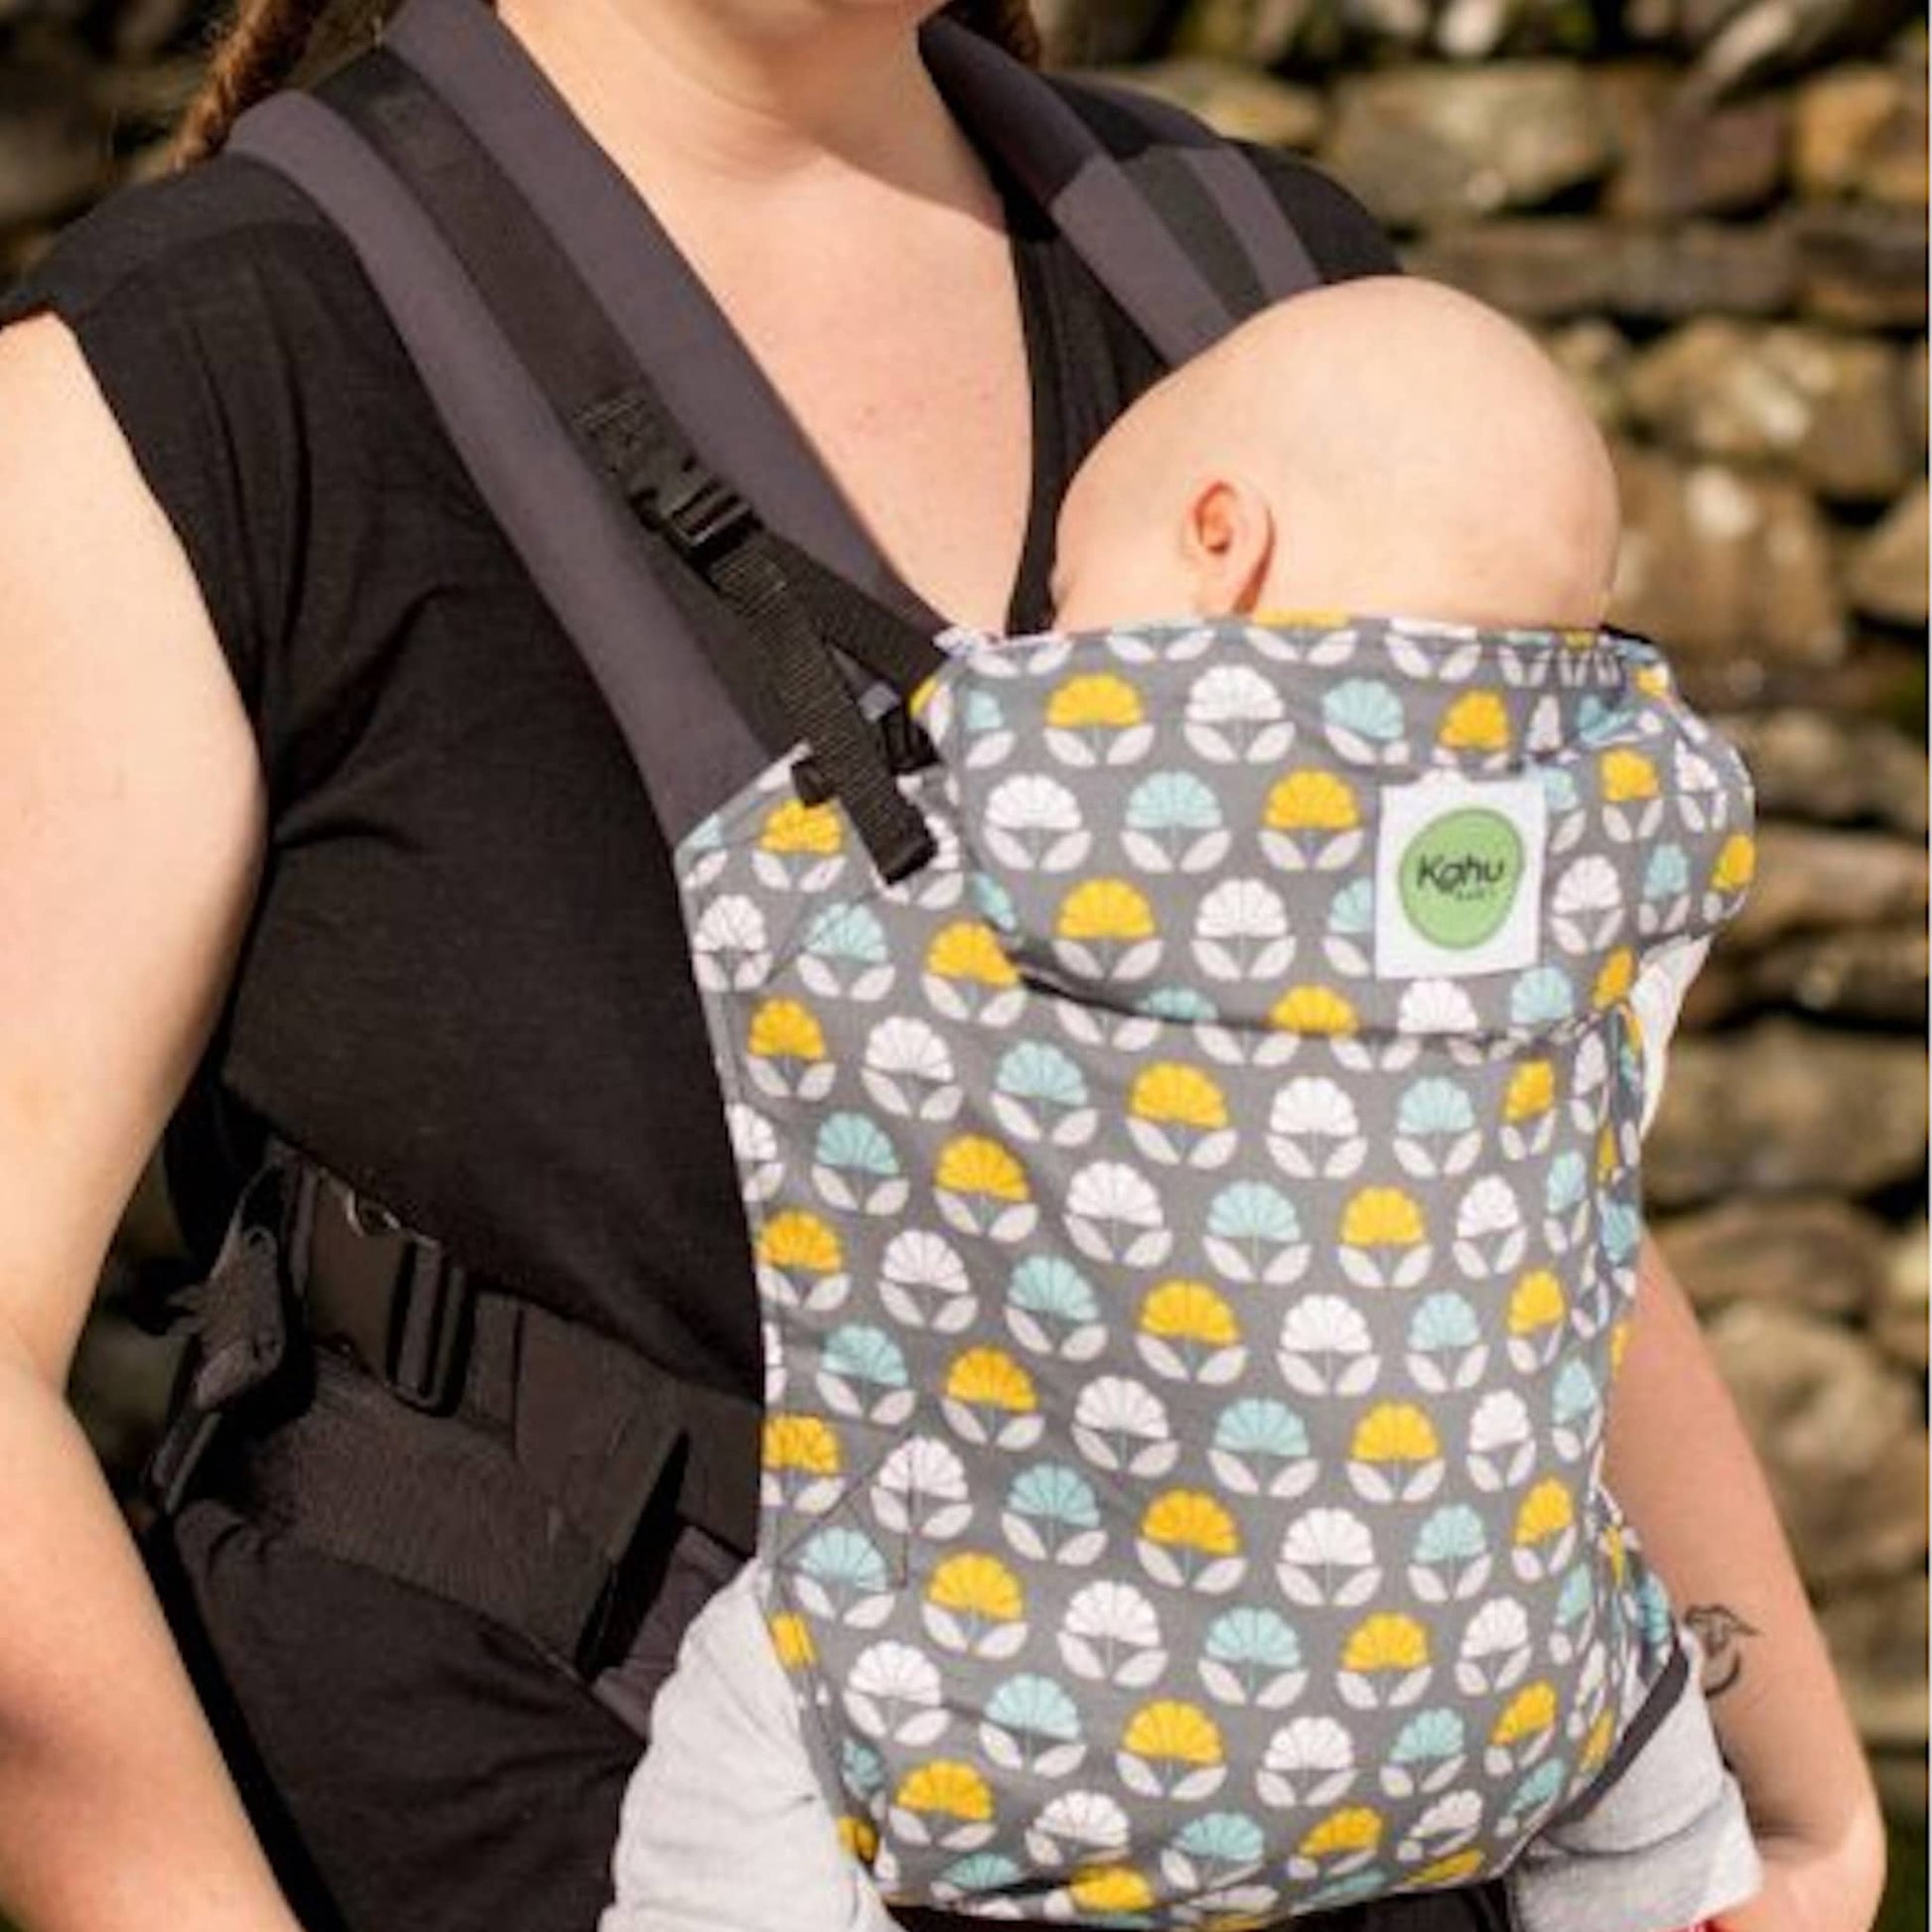 KahuBaby Baby Carrier Nesting Trees